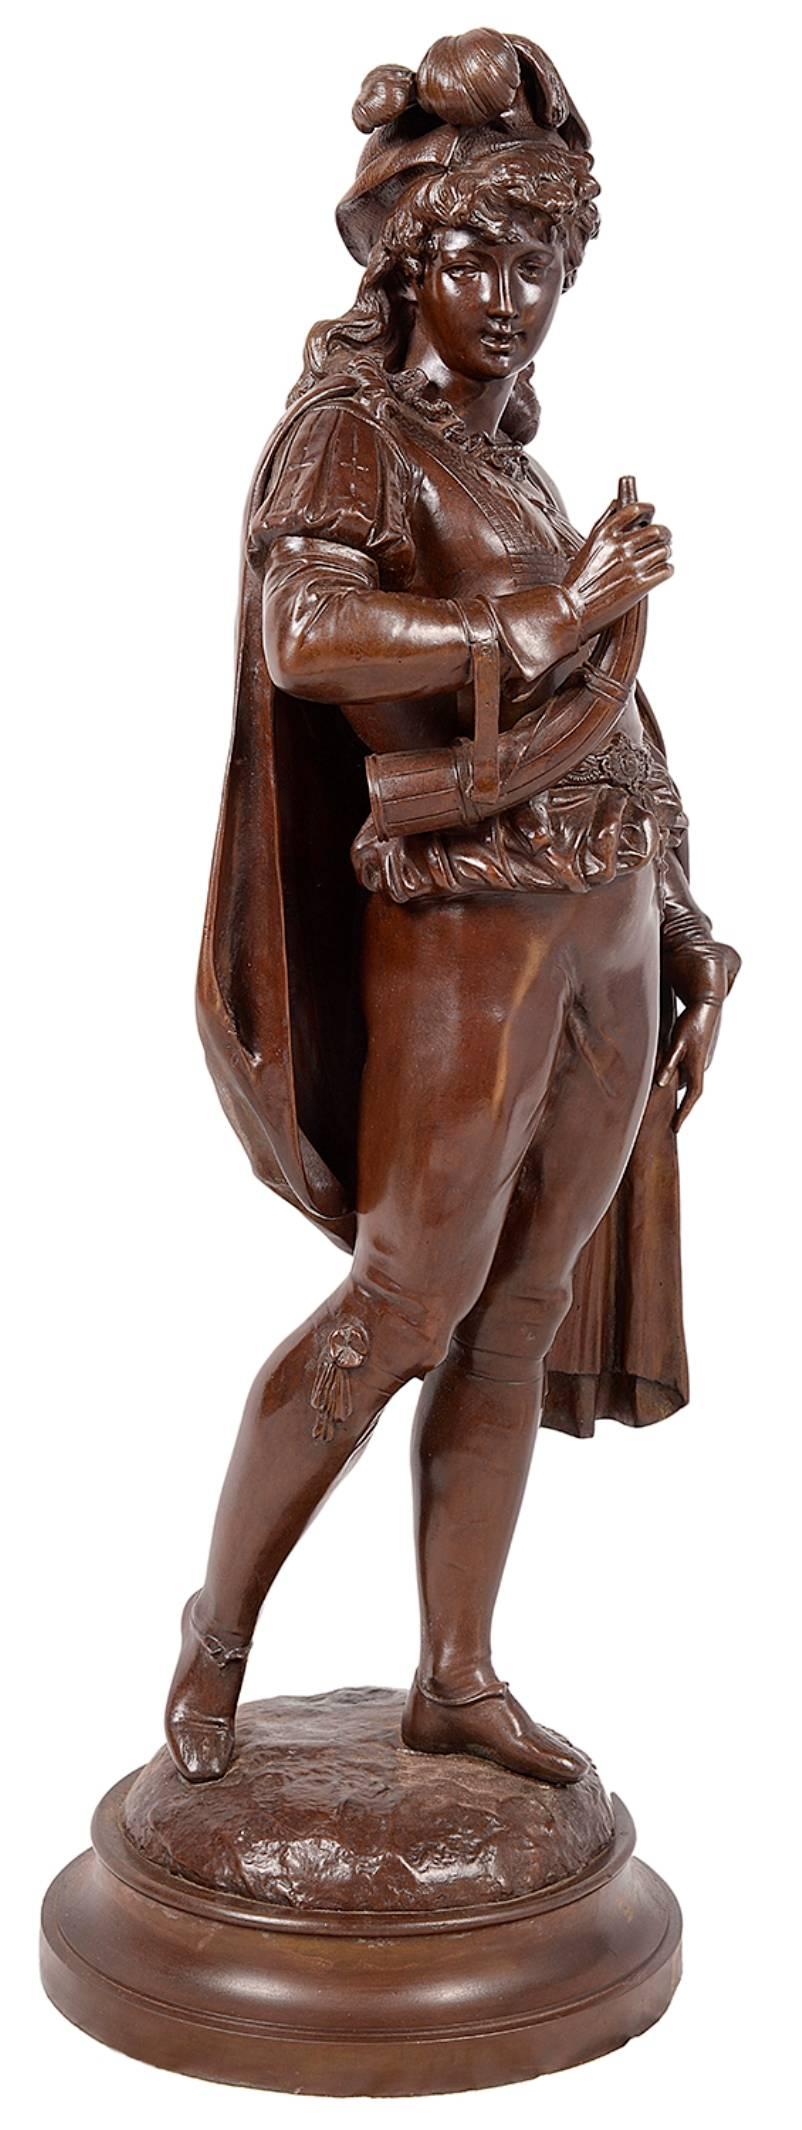 A very good quality 19th century bronze statue of French courtier, with a feather hat, cloak and horn.
Signed; Duboy
Paul Duboy (1830-1887).